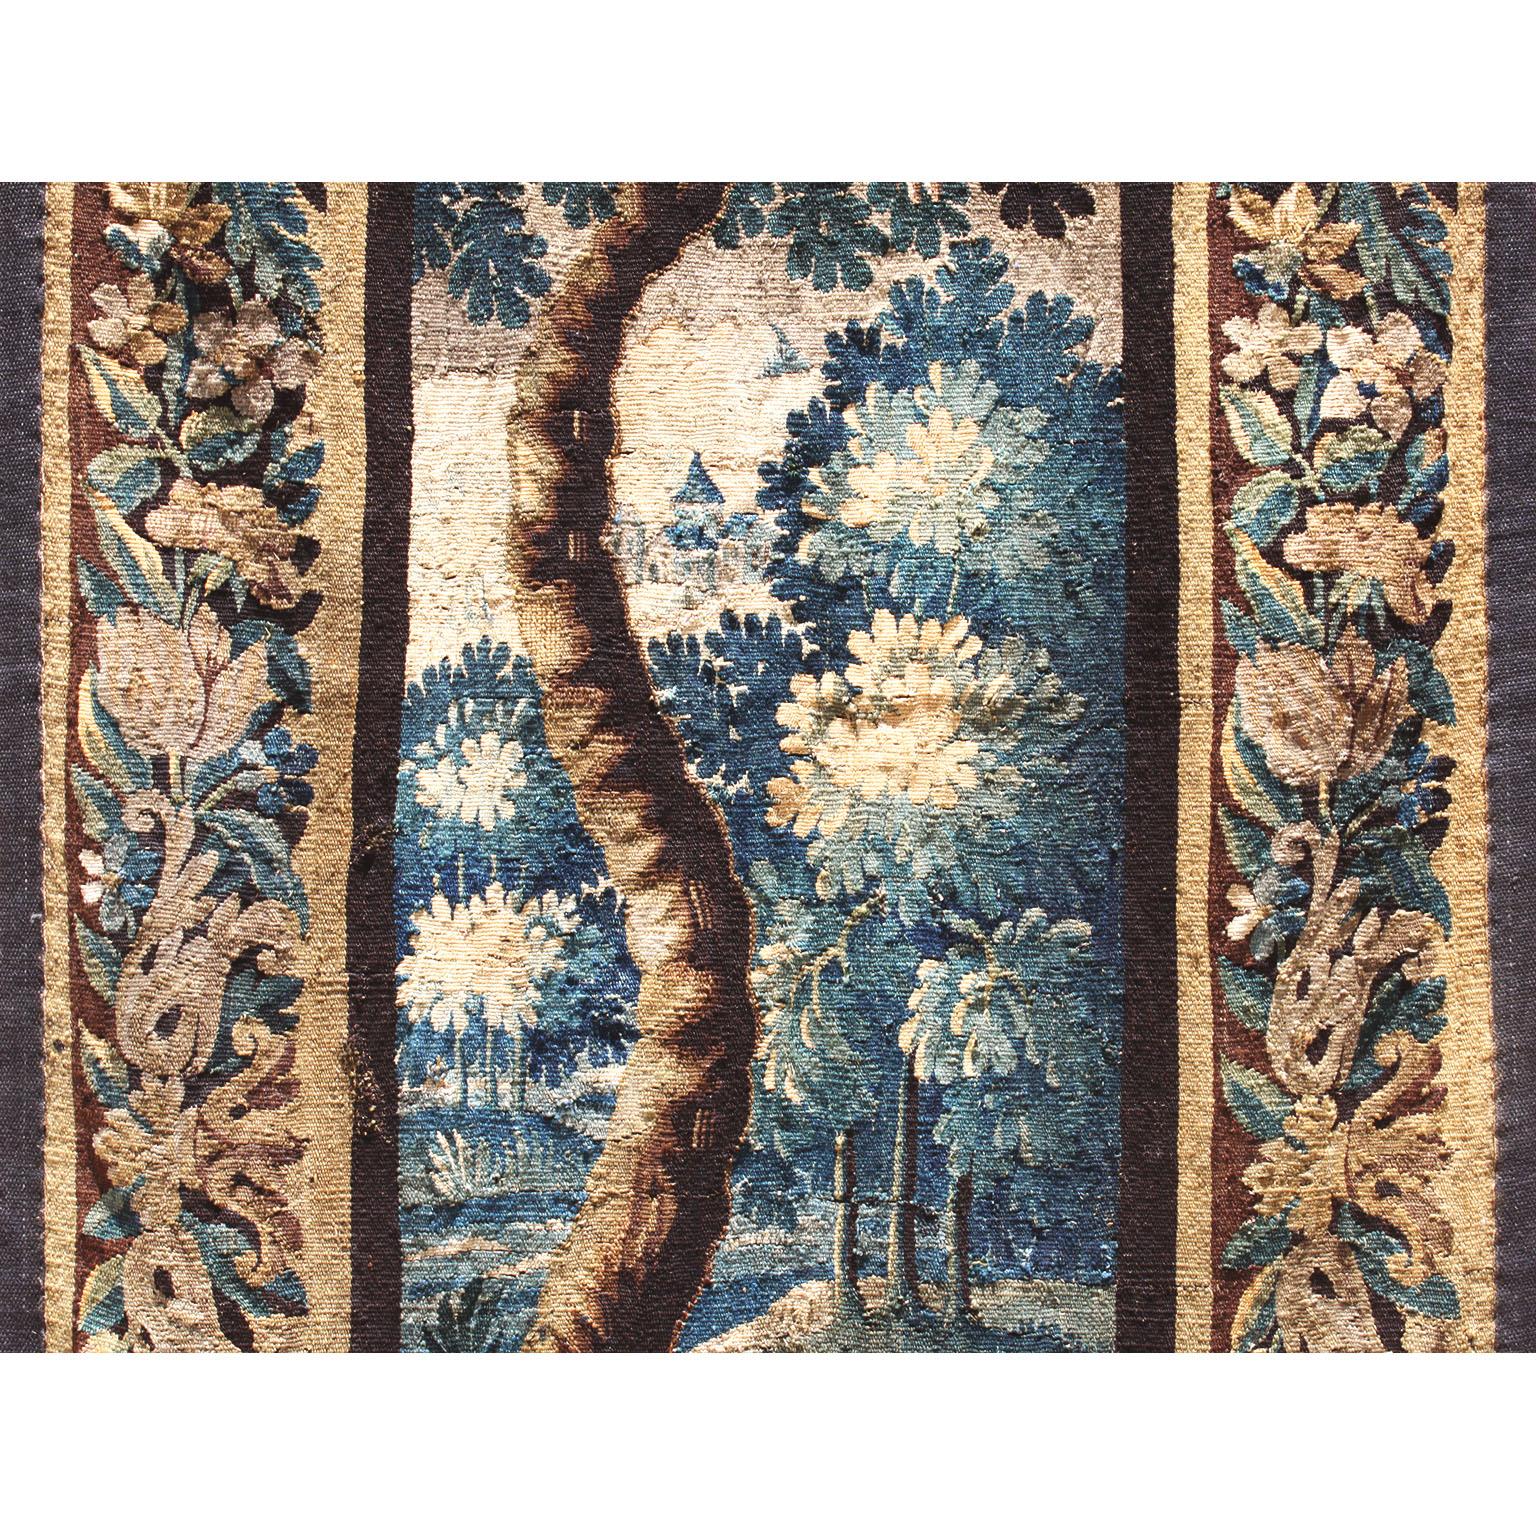 Belgian Flemish 18th-19th Century Verdure Landscape Tapestry Panel Centered with a Tree For Sale